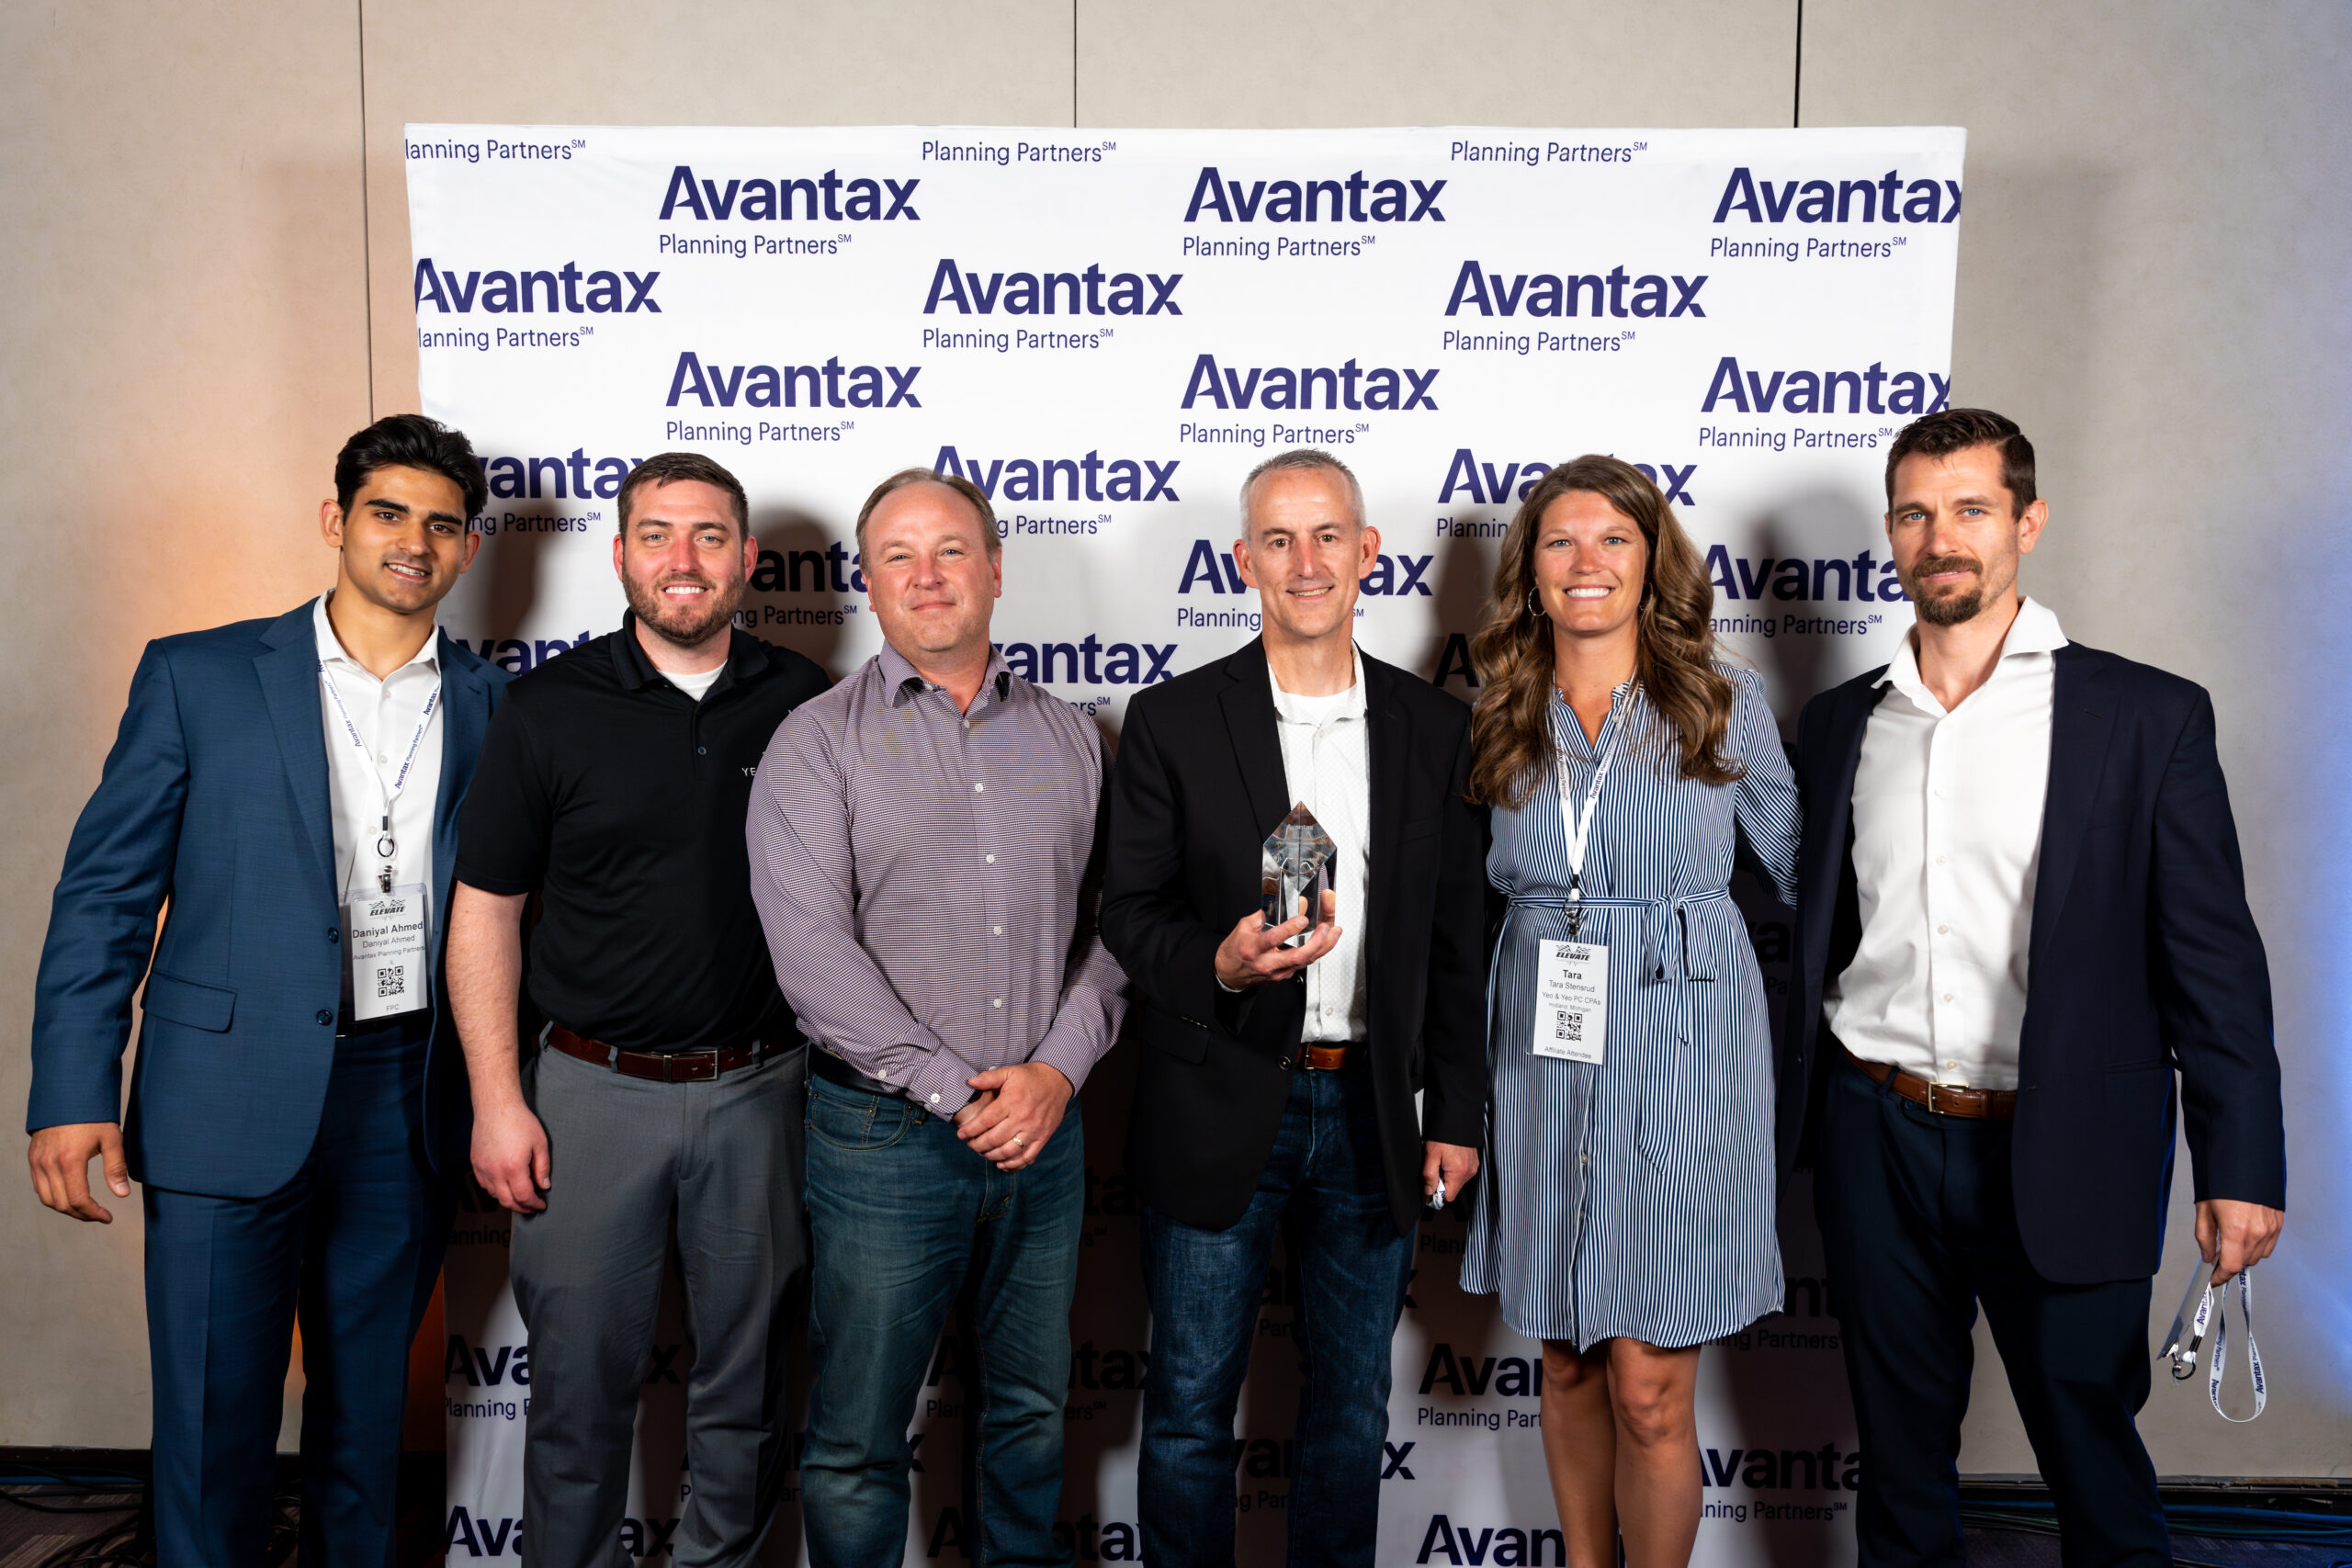 Yeo & Yeo Wealth Management Receives Growth Award and Top Wealth Advisory Firm Recognition from Avantax Planning Partners